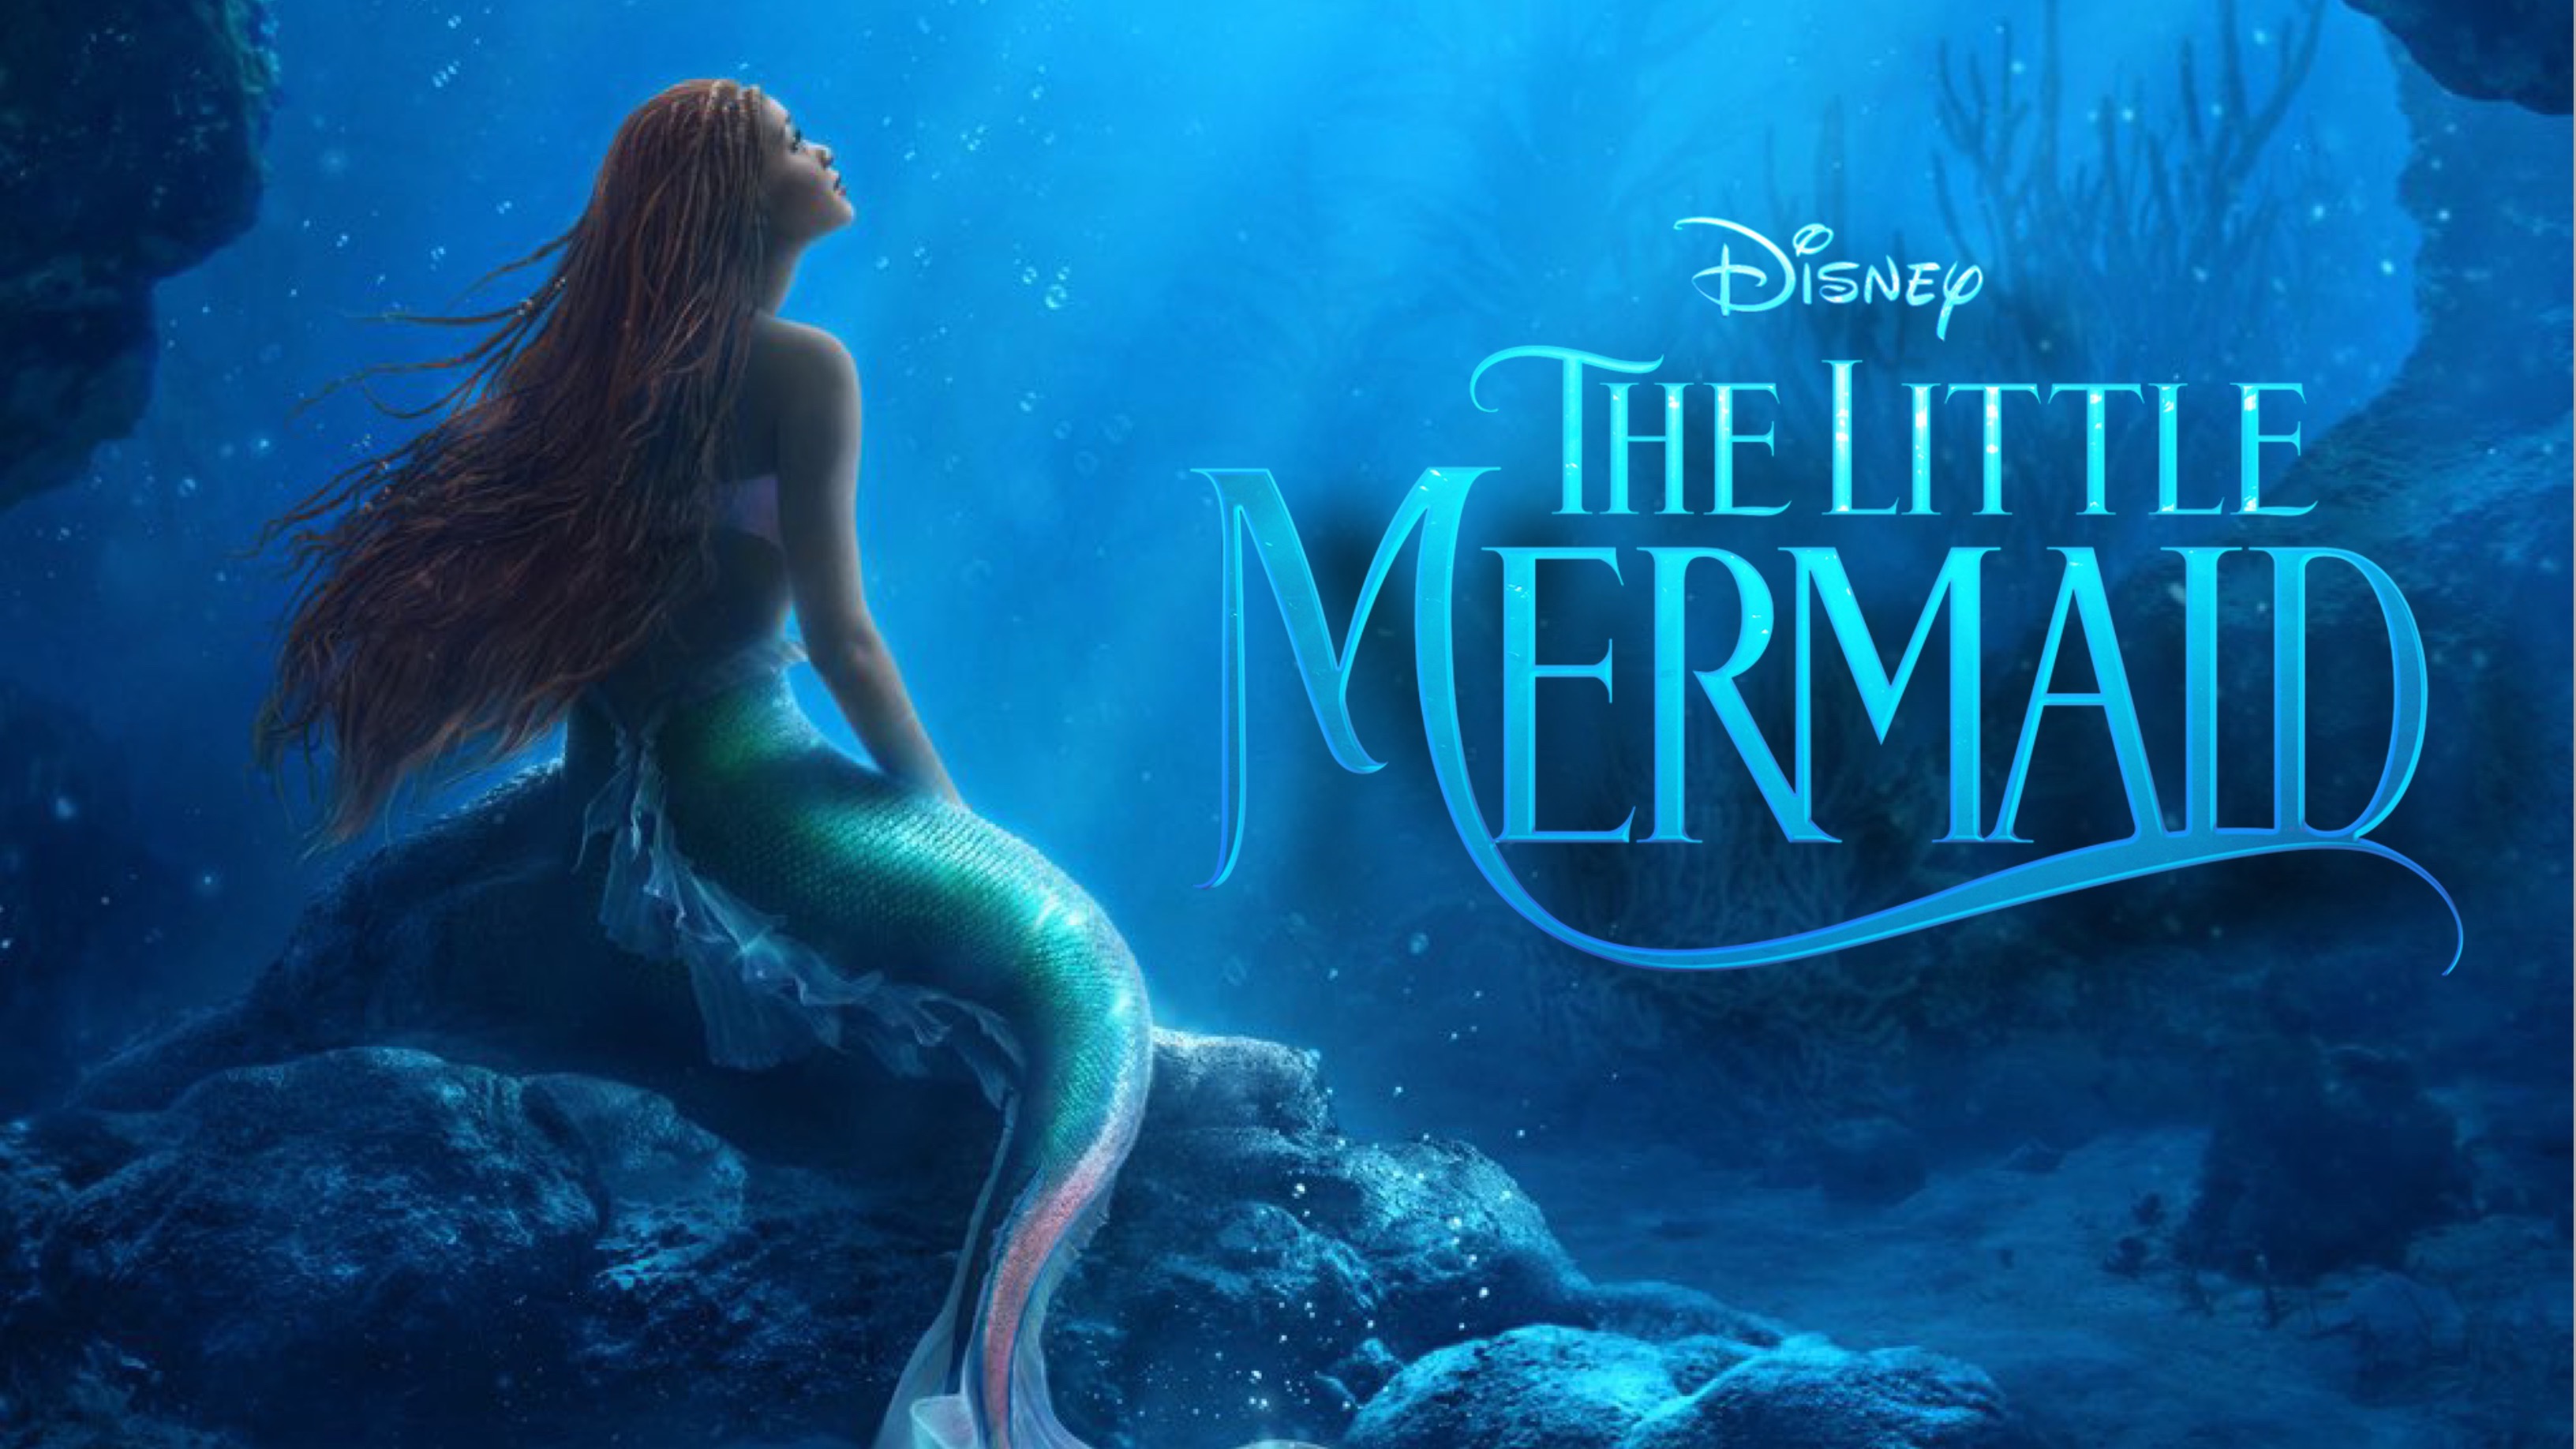 Halle Bailey Shares The First Poster For 'The Little Mermaid' The